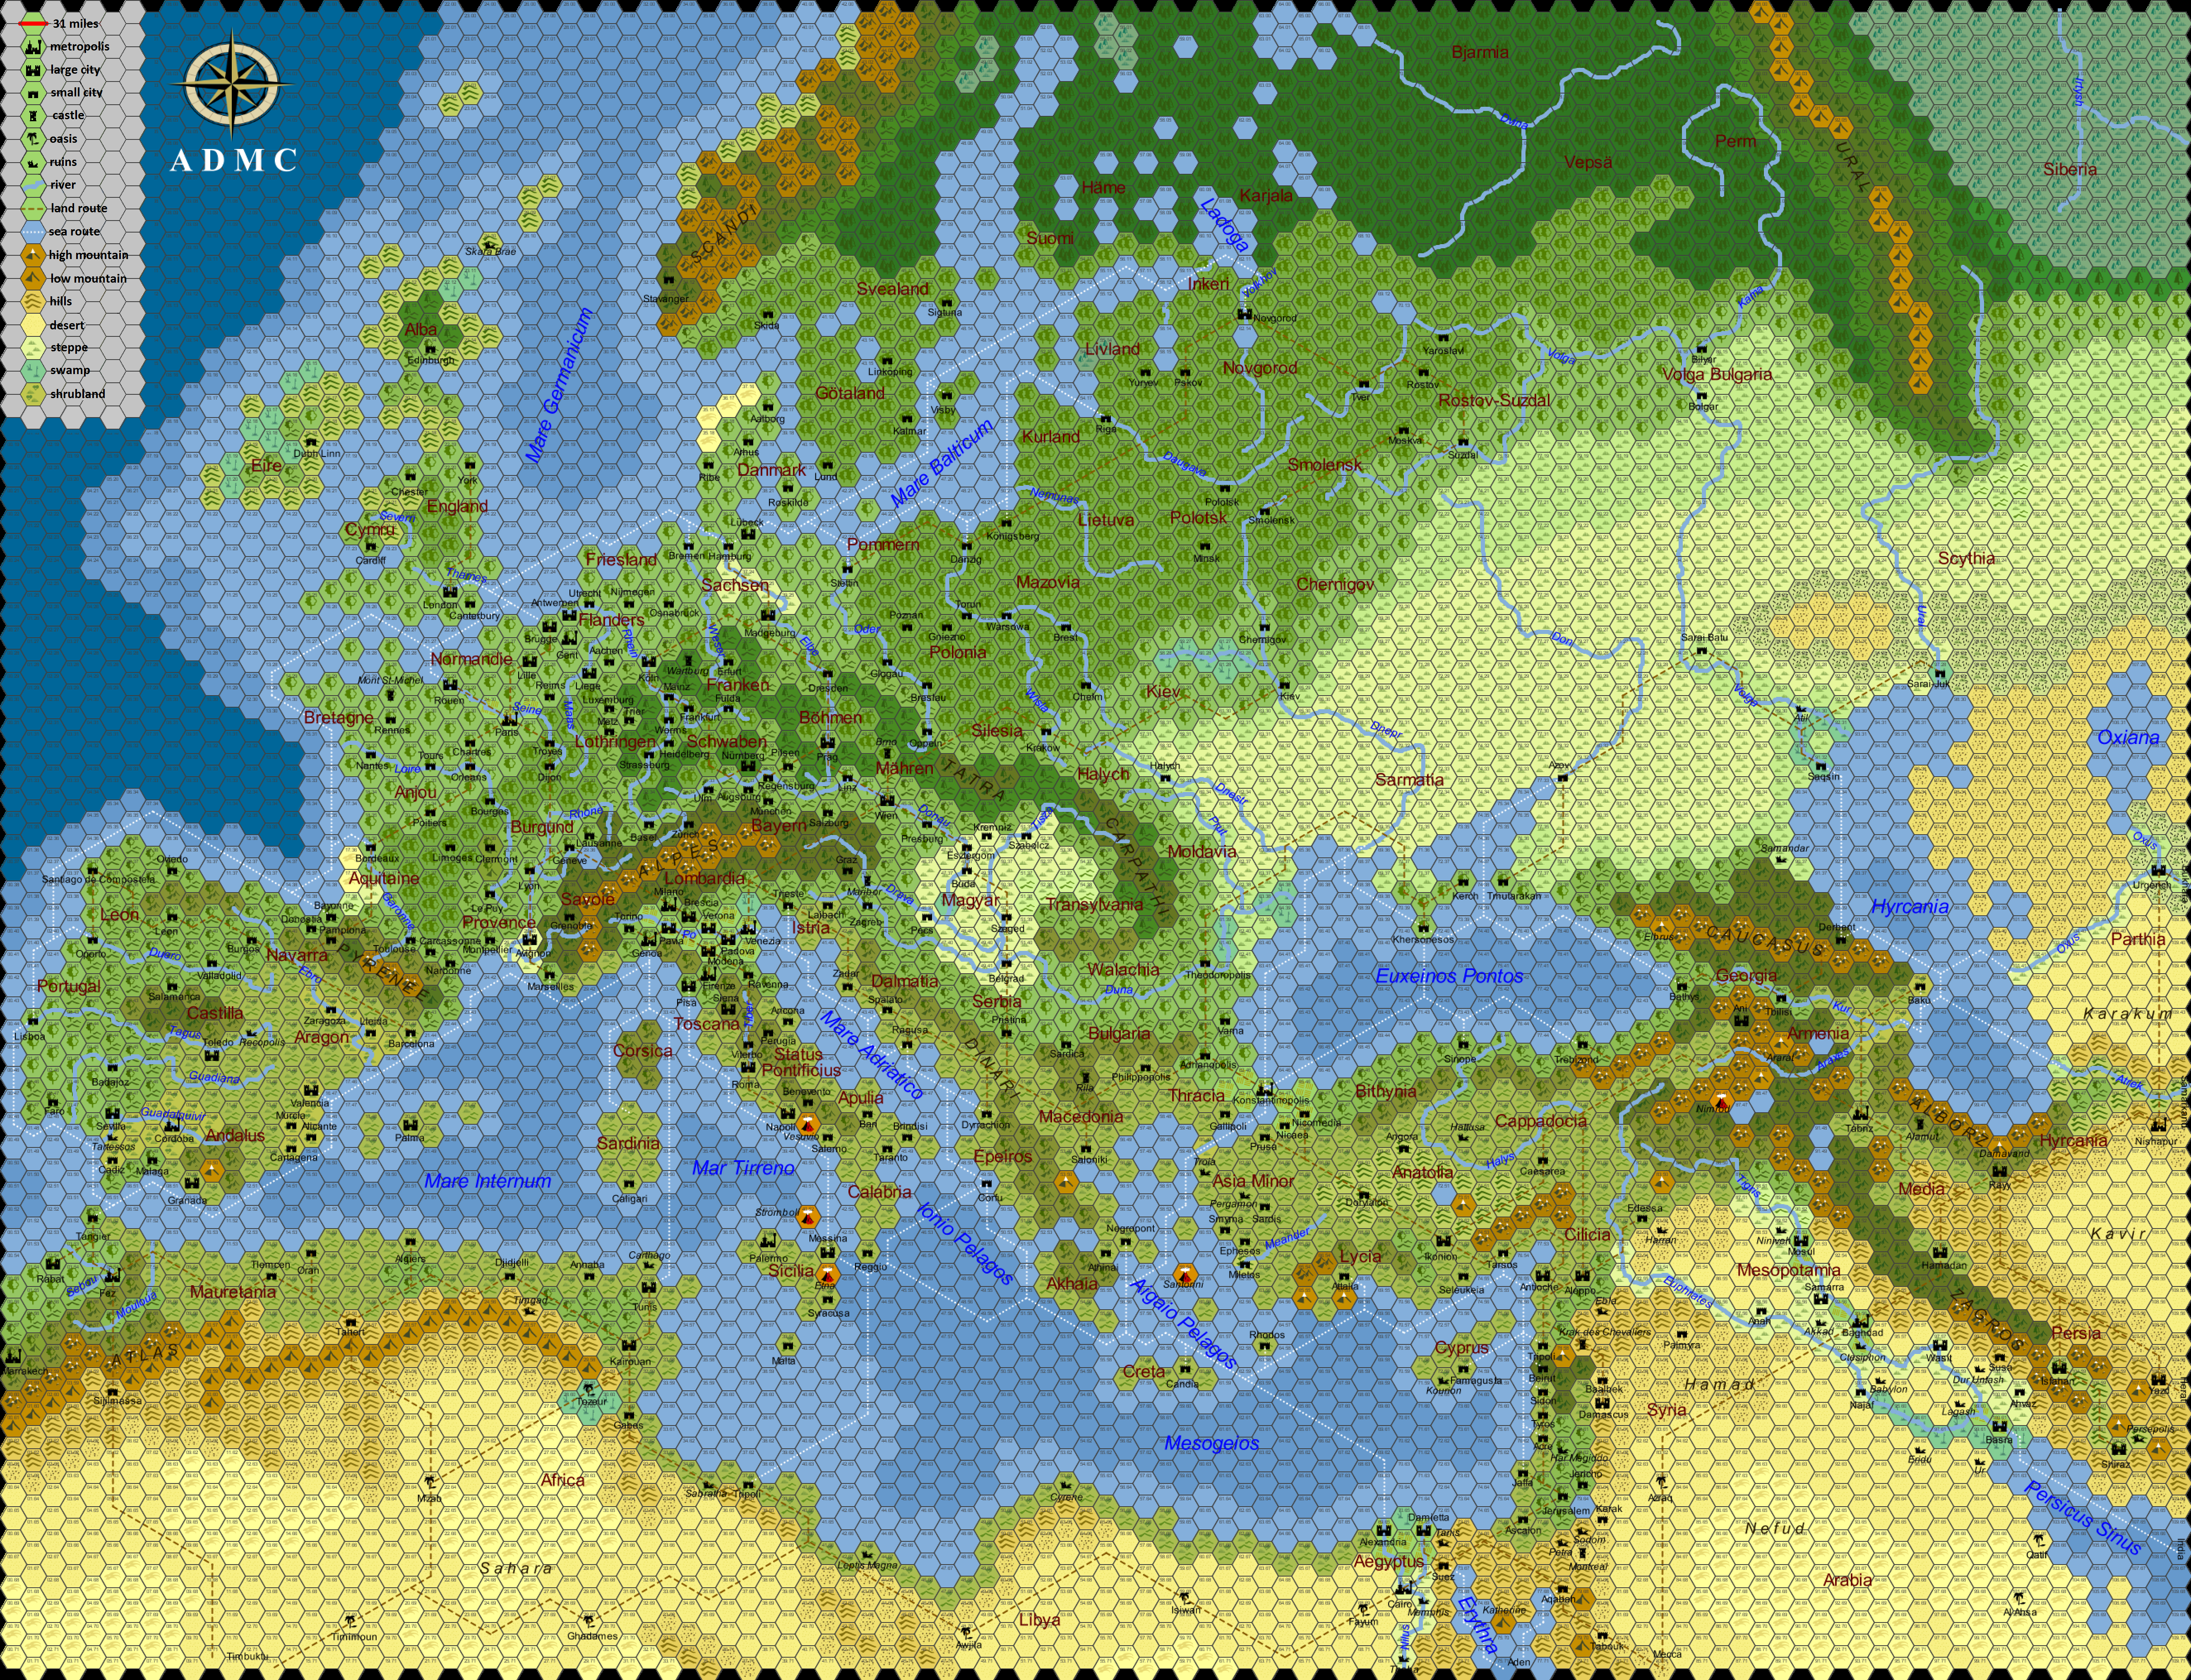 europe_1100_ad_hex_map_original_cropped_by_thomasbowman767-dc5azei.png